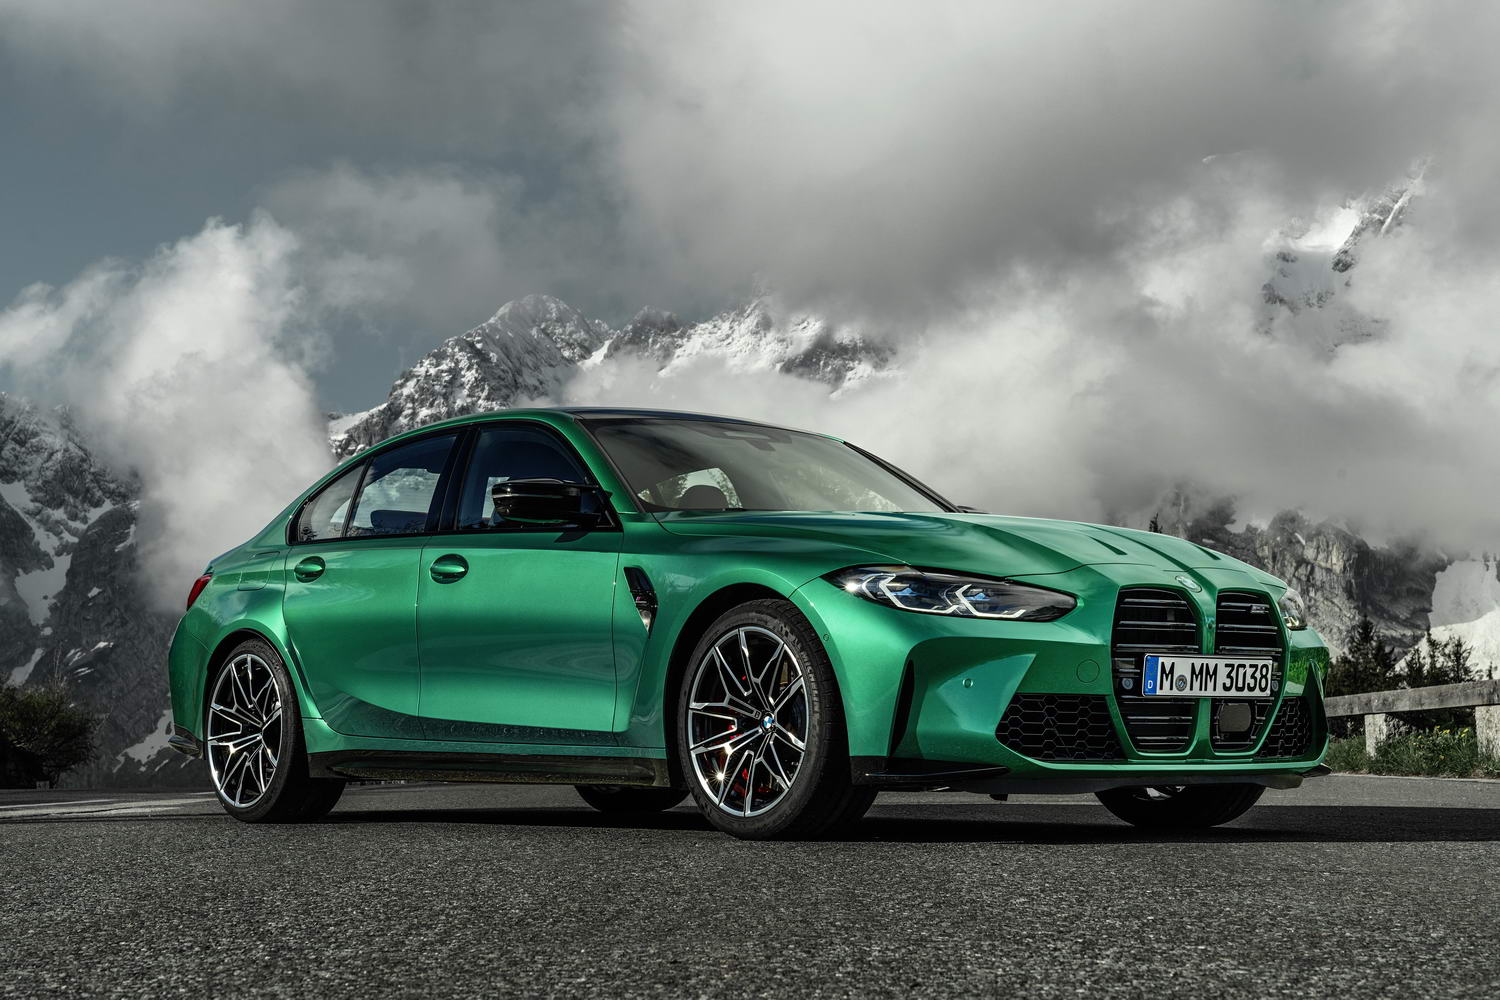  2022  BMW  M3 Saloon image gallery car and motoring news  